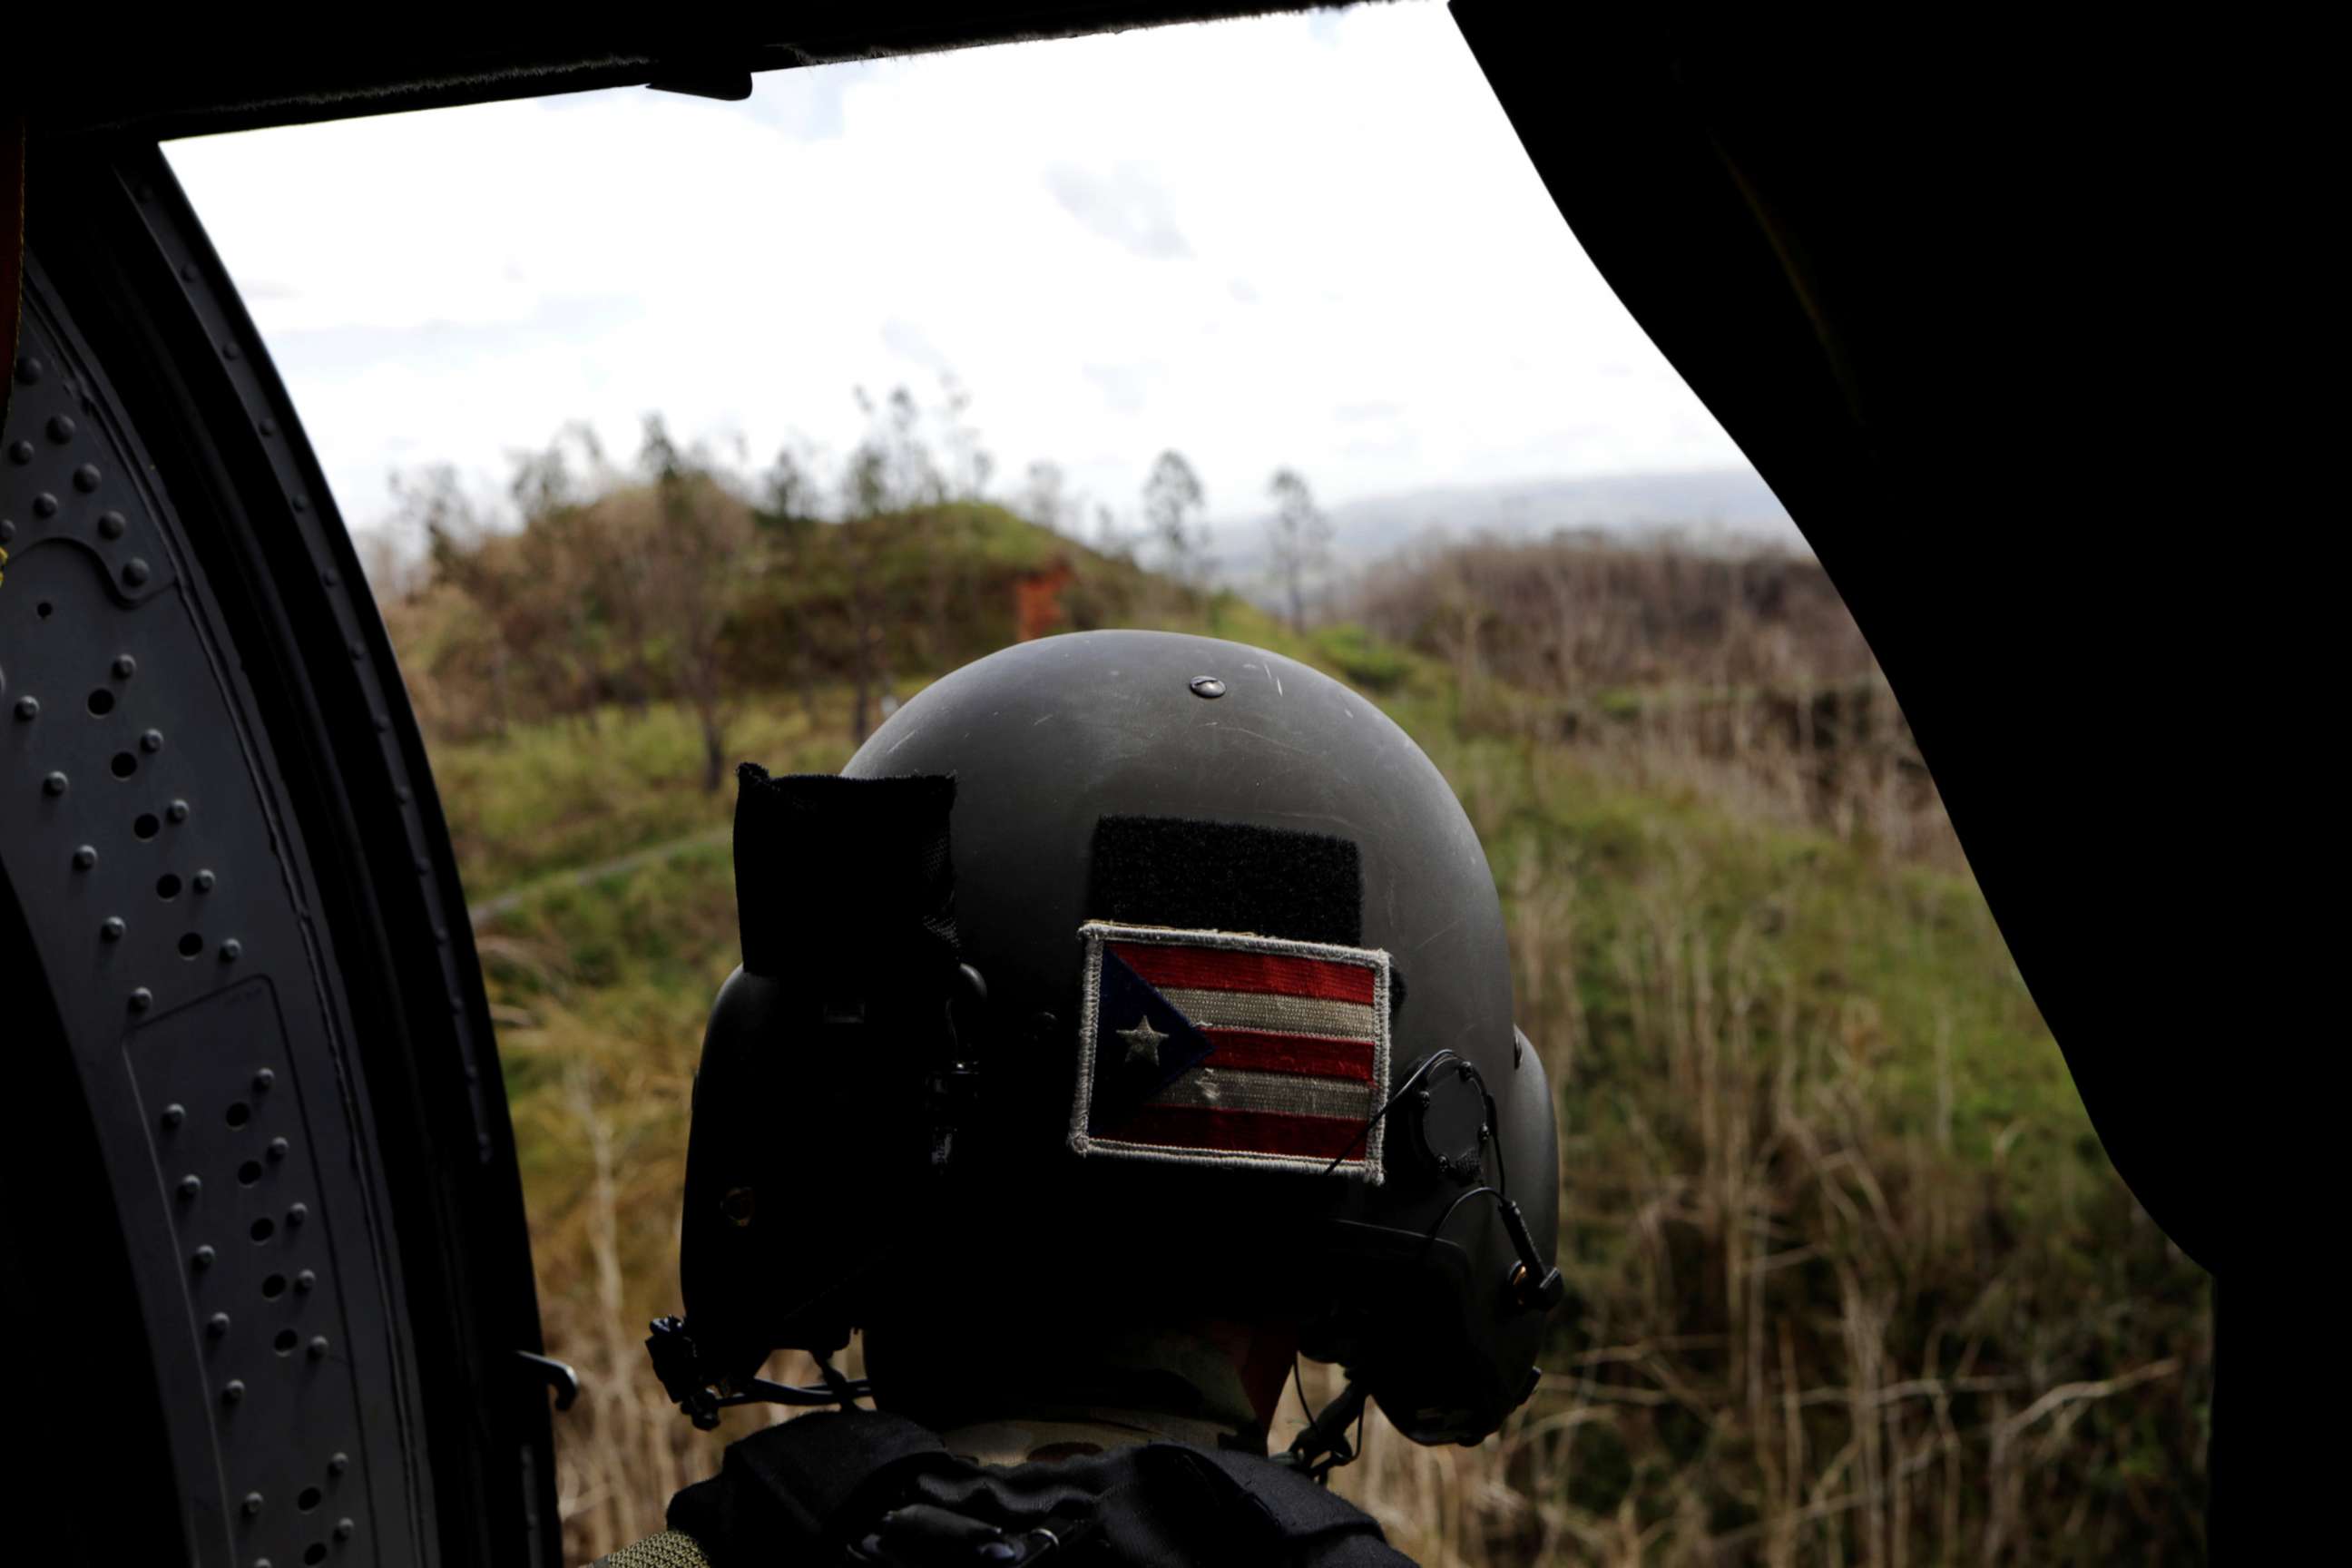 PHOTO: Sergeant First Class Eladio Tirado, who is from Puerto Rico, looks for a landing spot for a UH-60 Blackhawk helicopter during recovery efforts following Hurricane Maria near Ciales, Puerto Rico, Oct. 7, 2017.